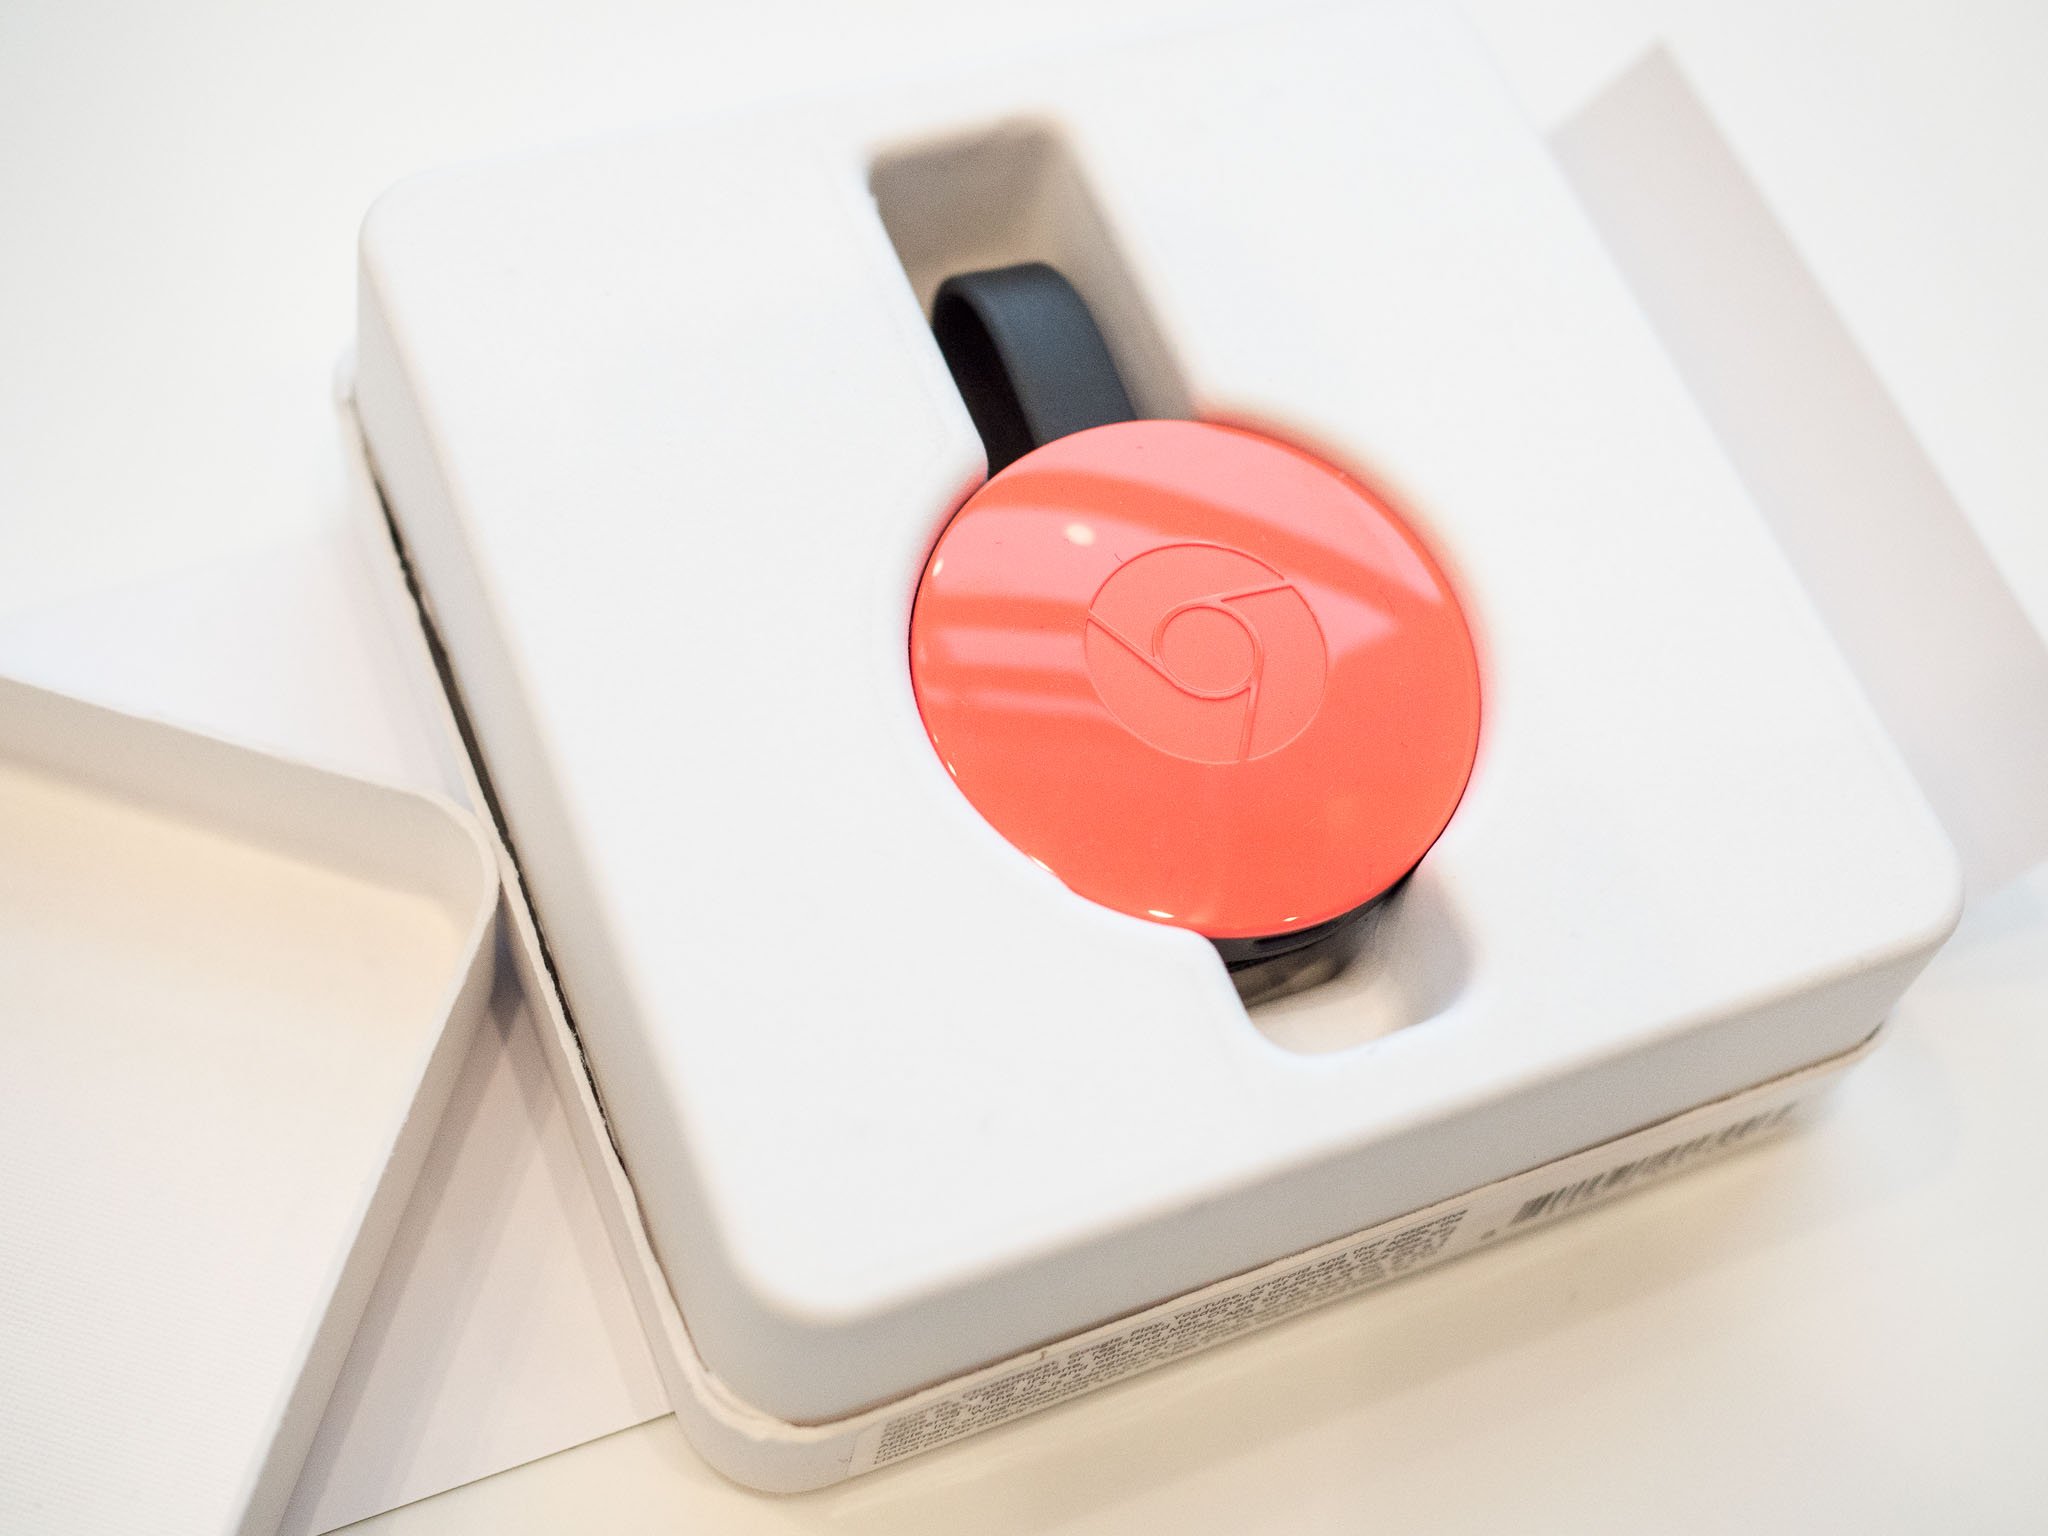 People are loving the Chromecast, and the numbers prove it